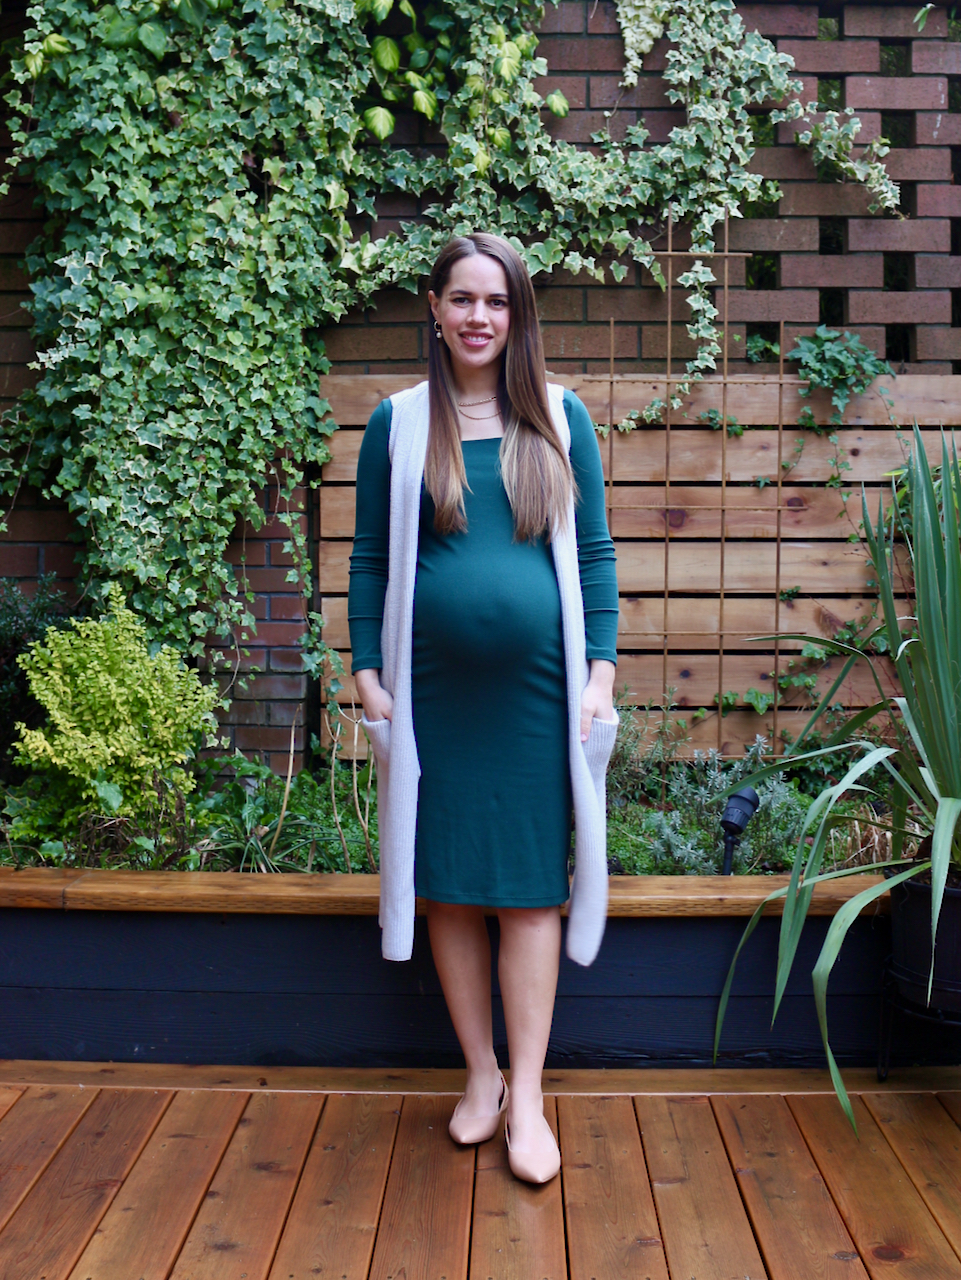 Jules in Flats - Squareneck Ribbed Midi Dress with Duster Vest (Business Casual Workwear on a Budget)